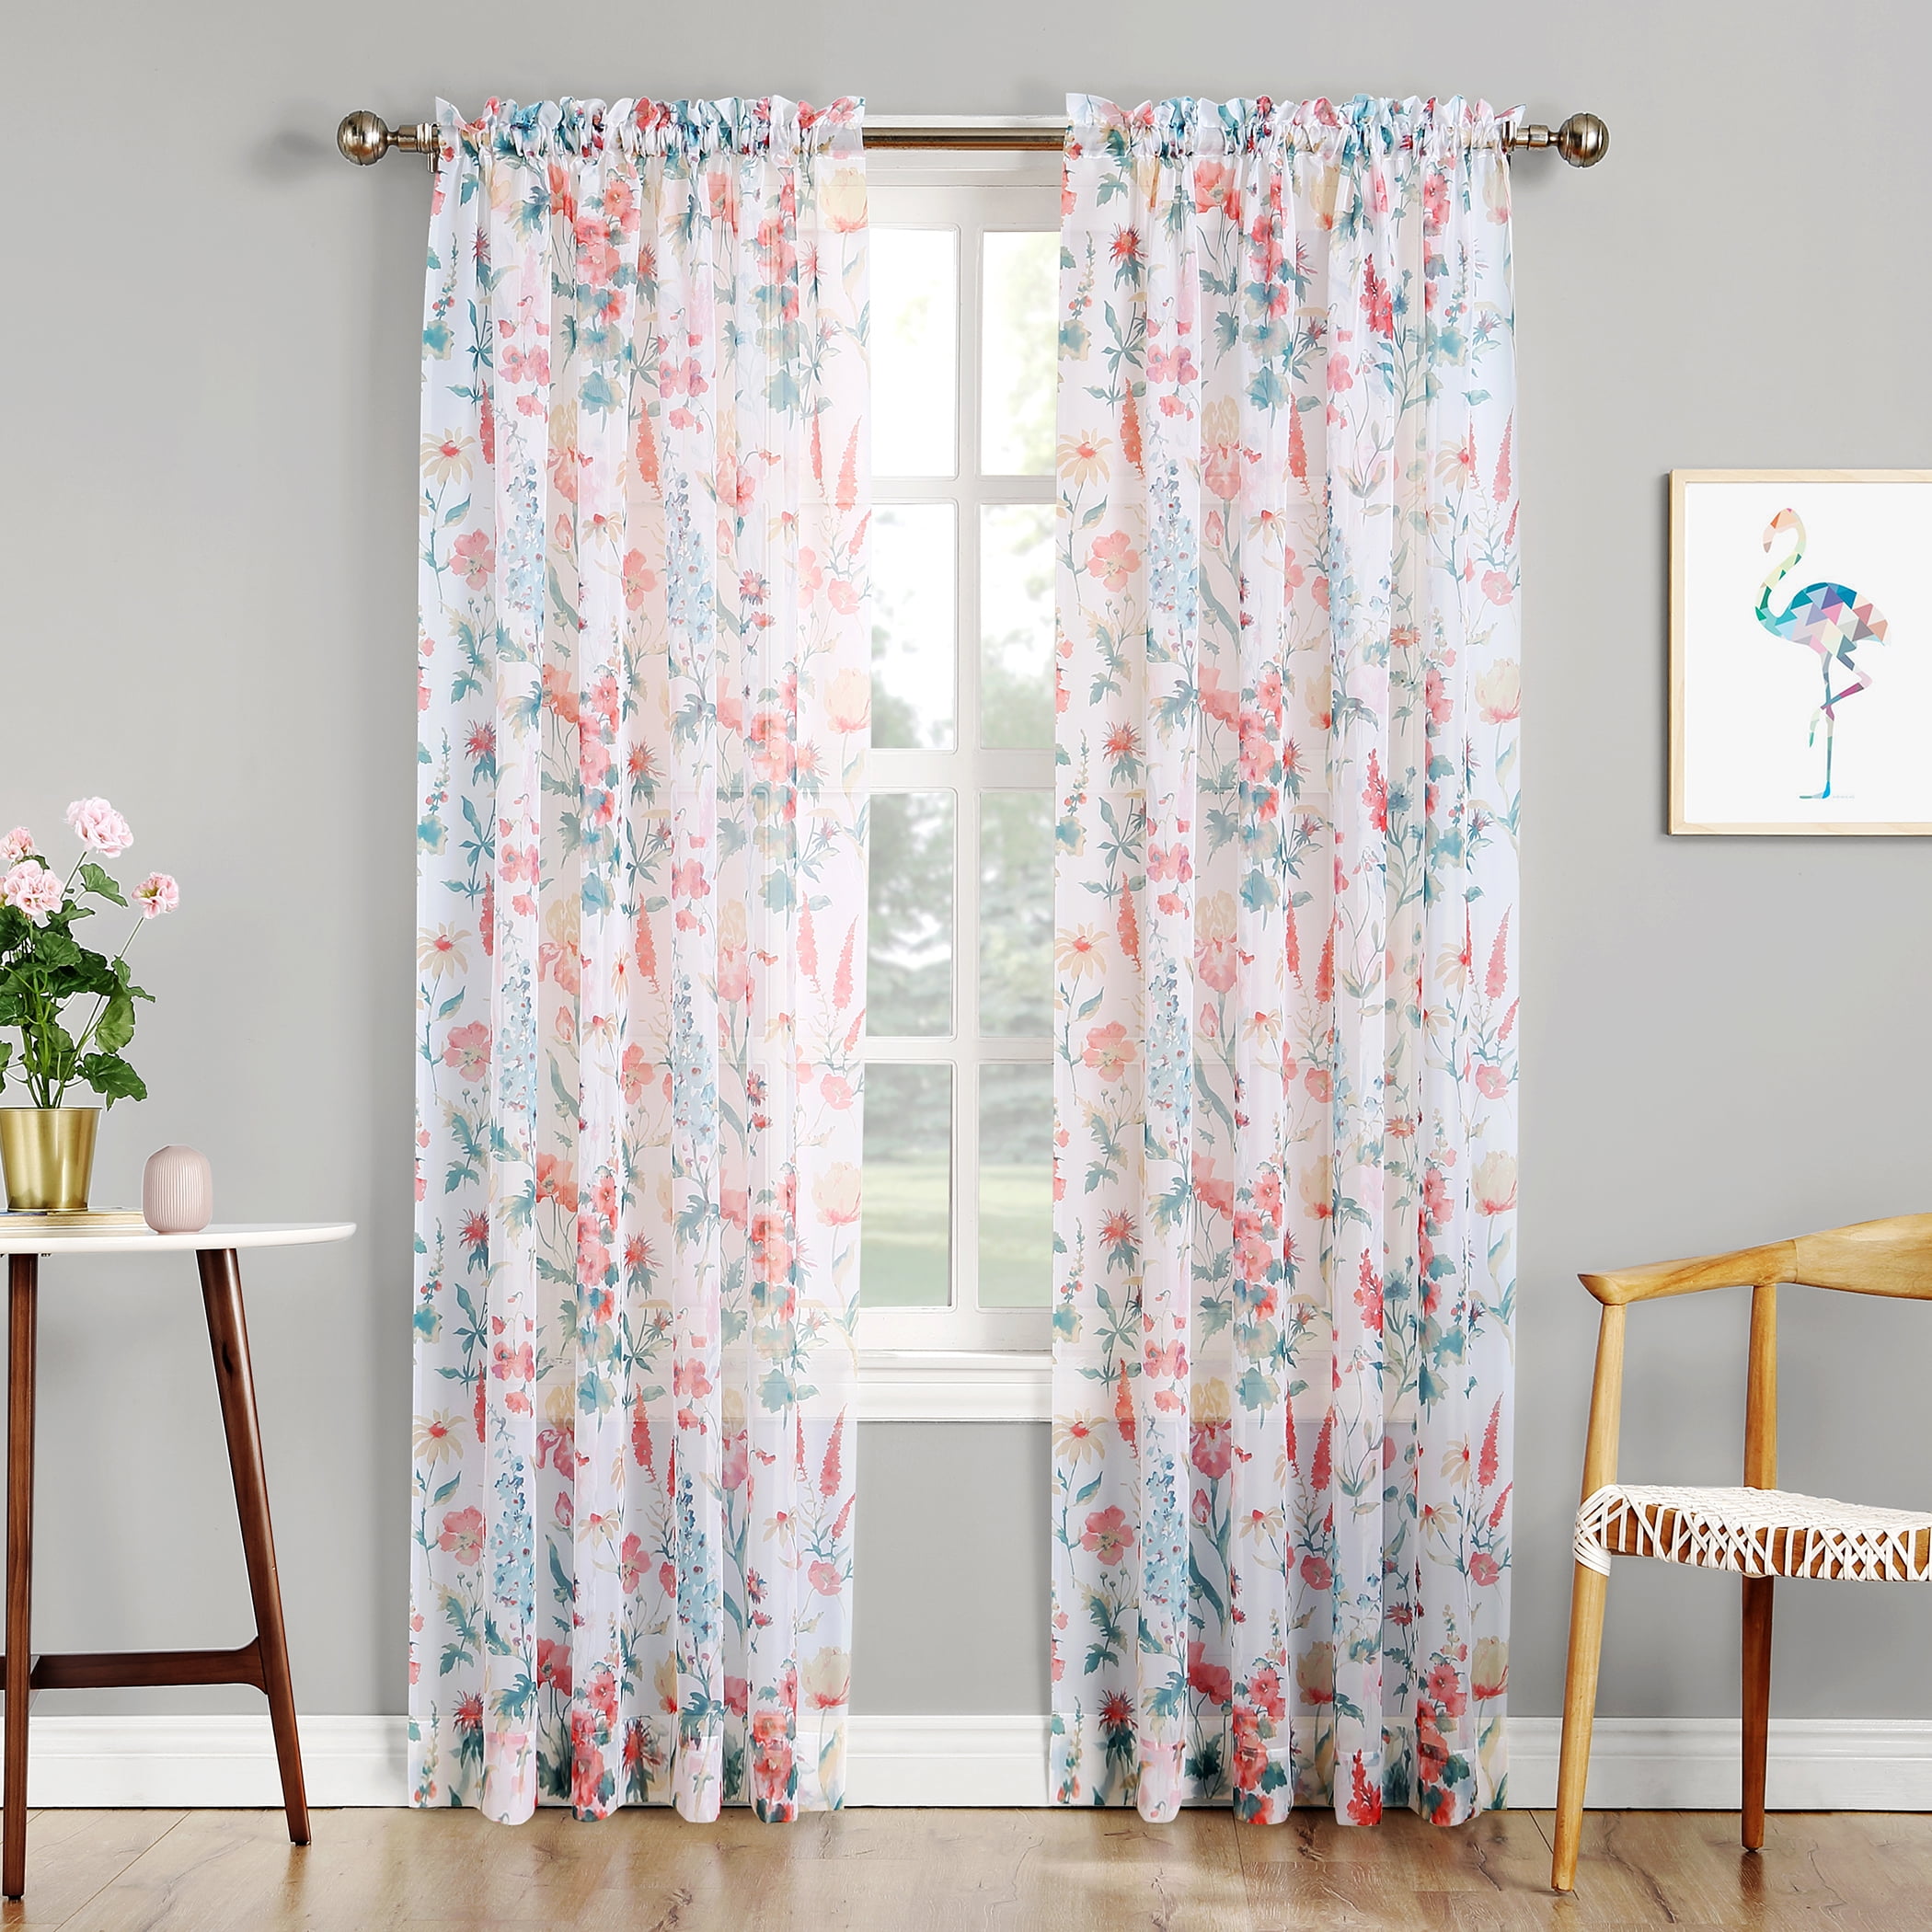 2PC New Curtain Solid Sheer Voile Window Panel  58" x 84" Available in 7 Colors 